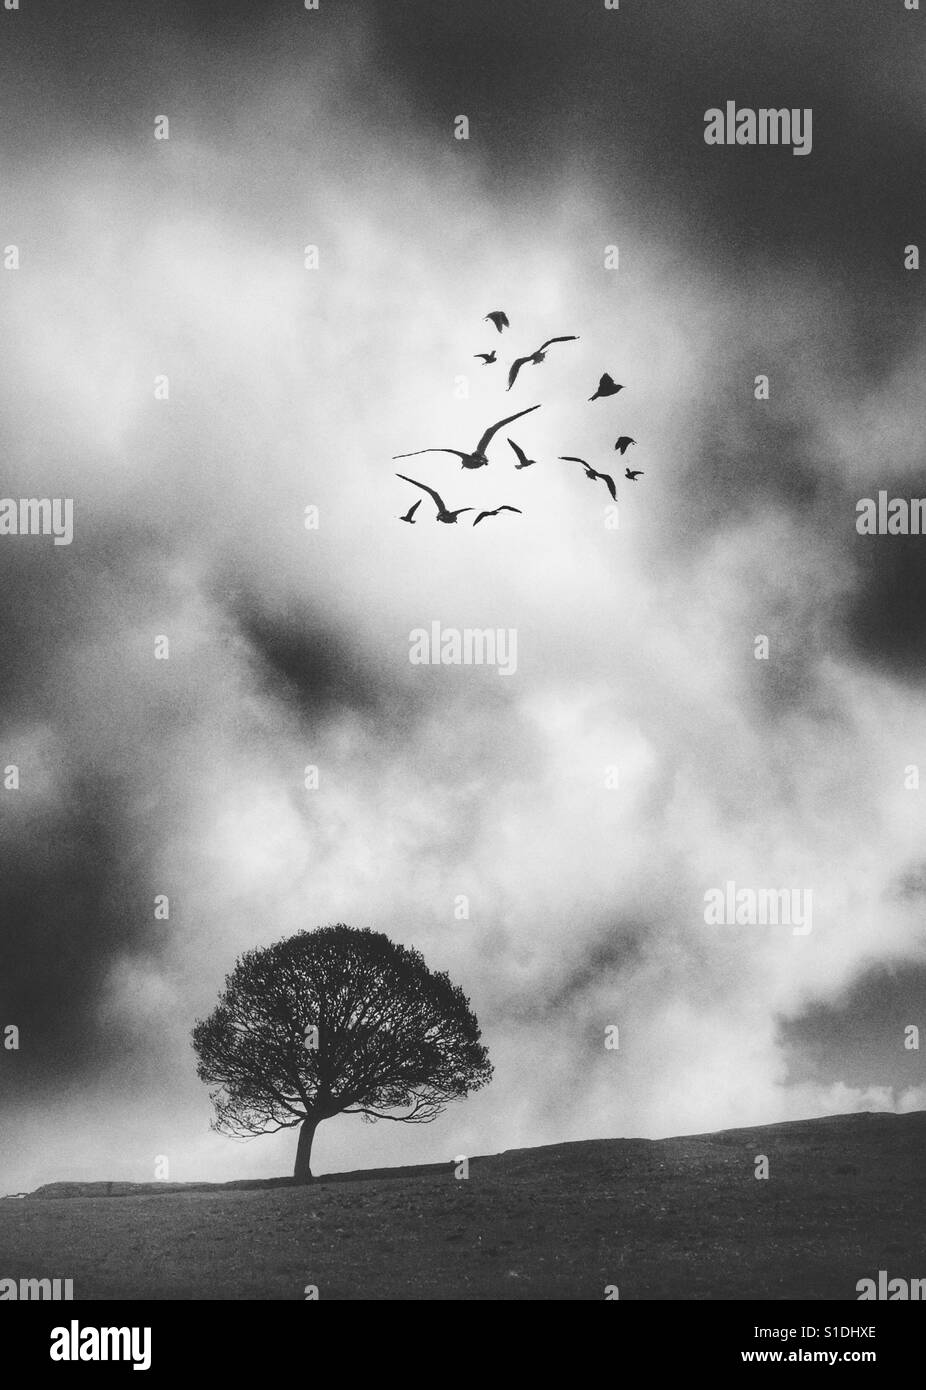 Lone tree against dramatic sky with birds flying overhead Stock Photo